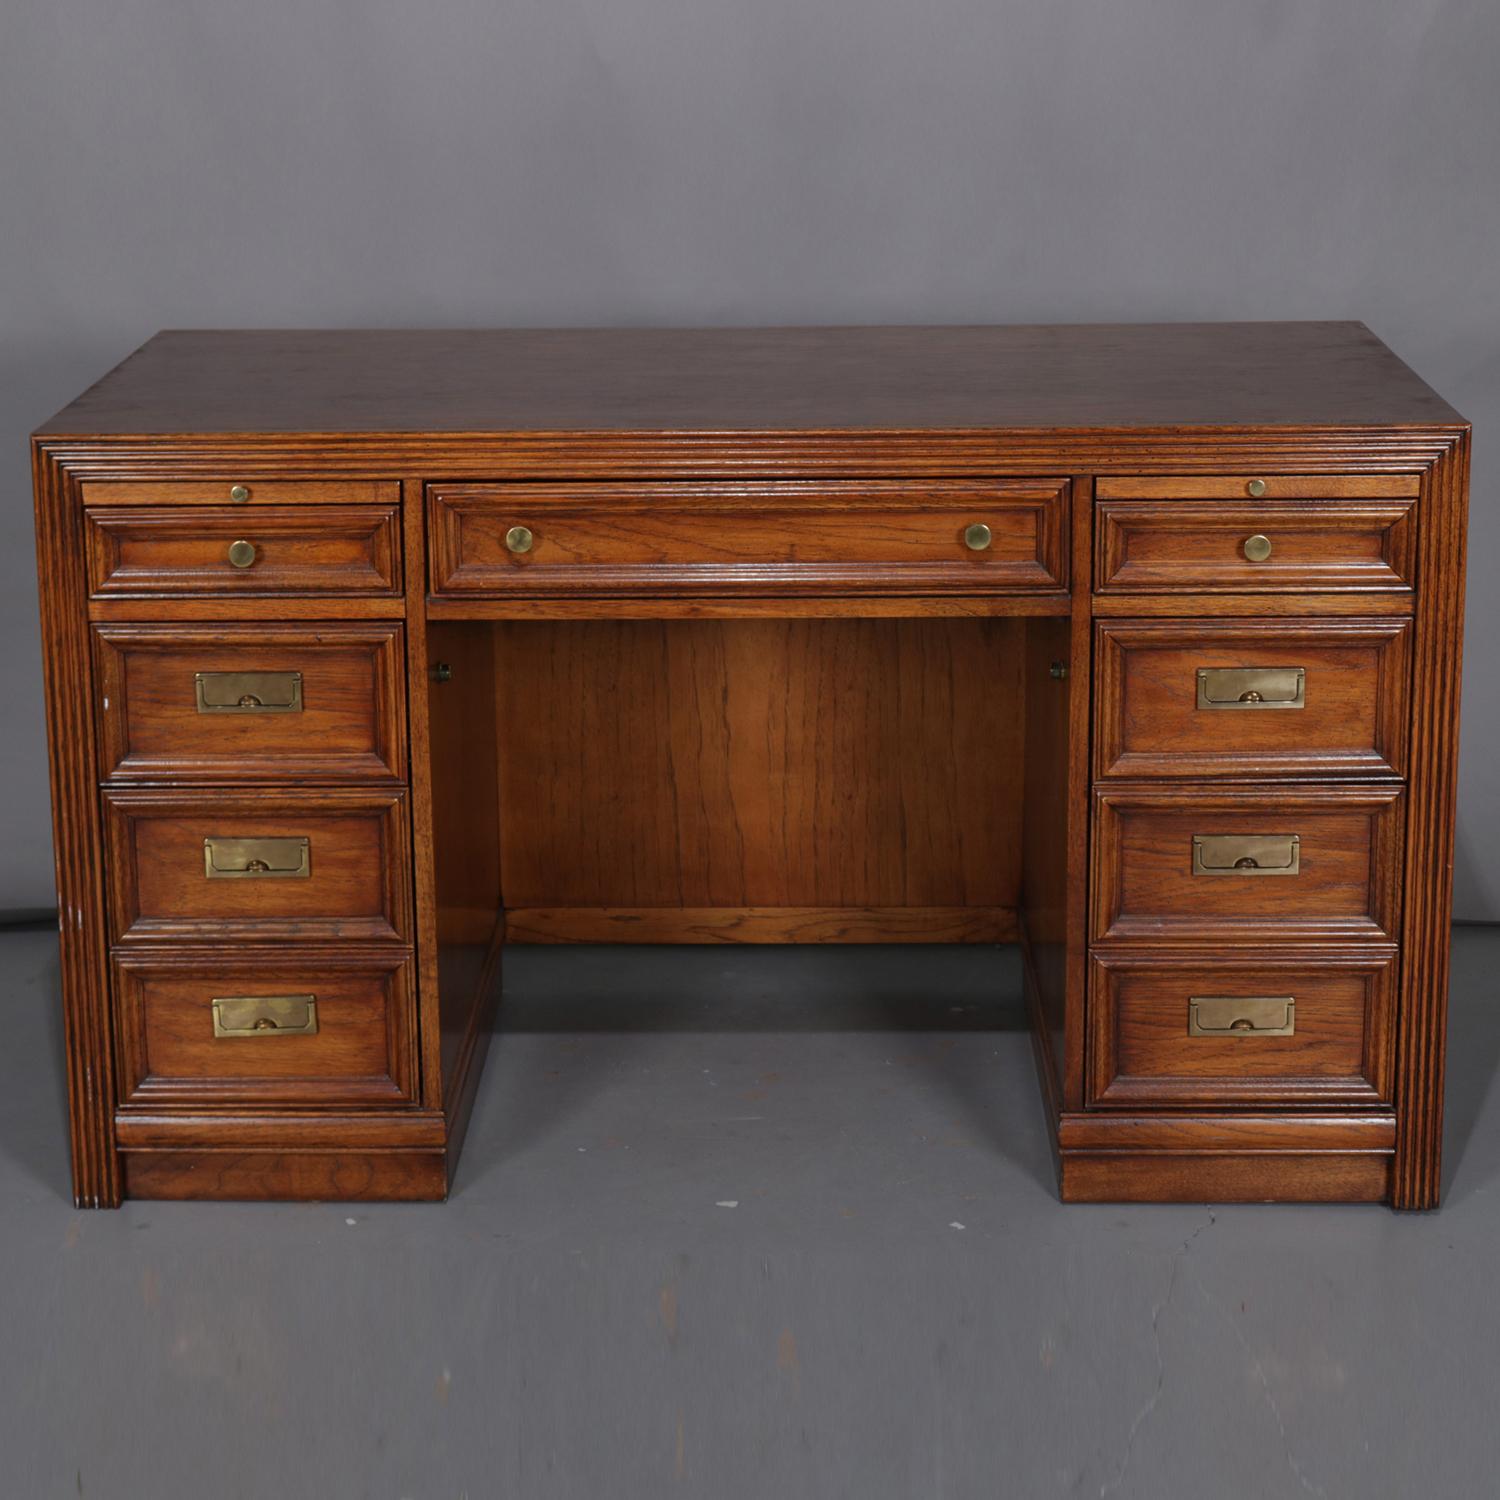 Vintage Campaign desk by Thomasville features oak construction with central long drawer flanked by side columns each having pull-out tray over three graduated drawers, the bottom for files, protective glass included but not photographed, Thomasville